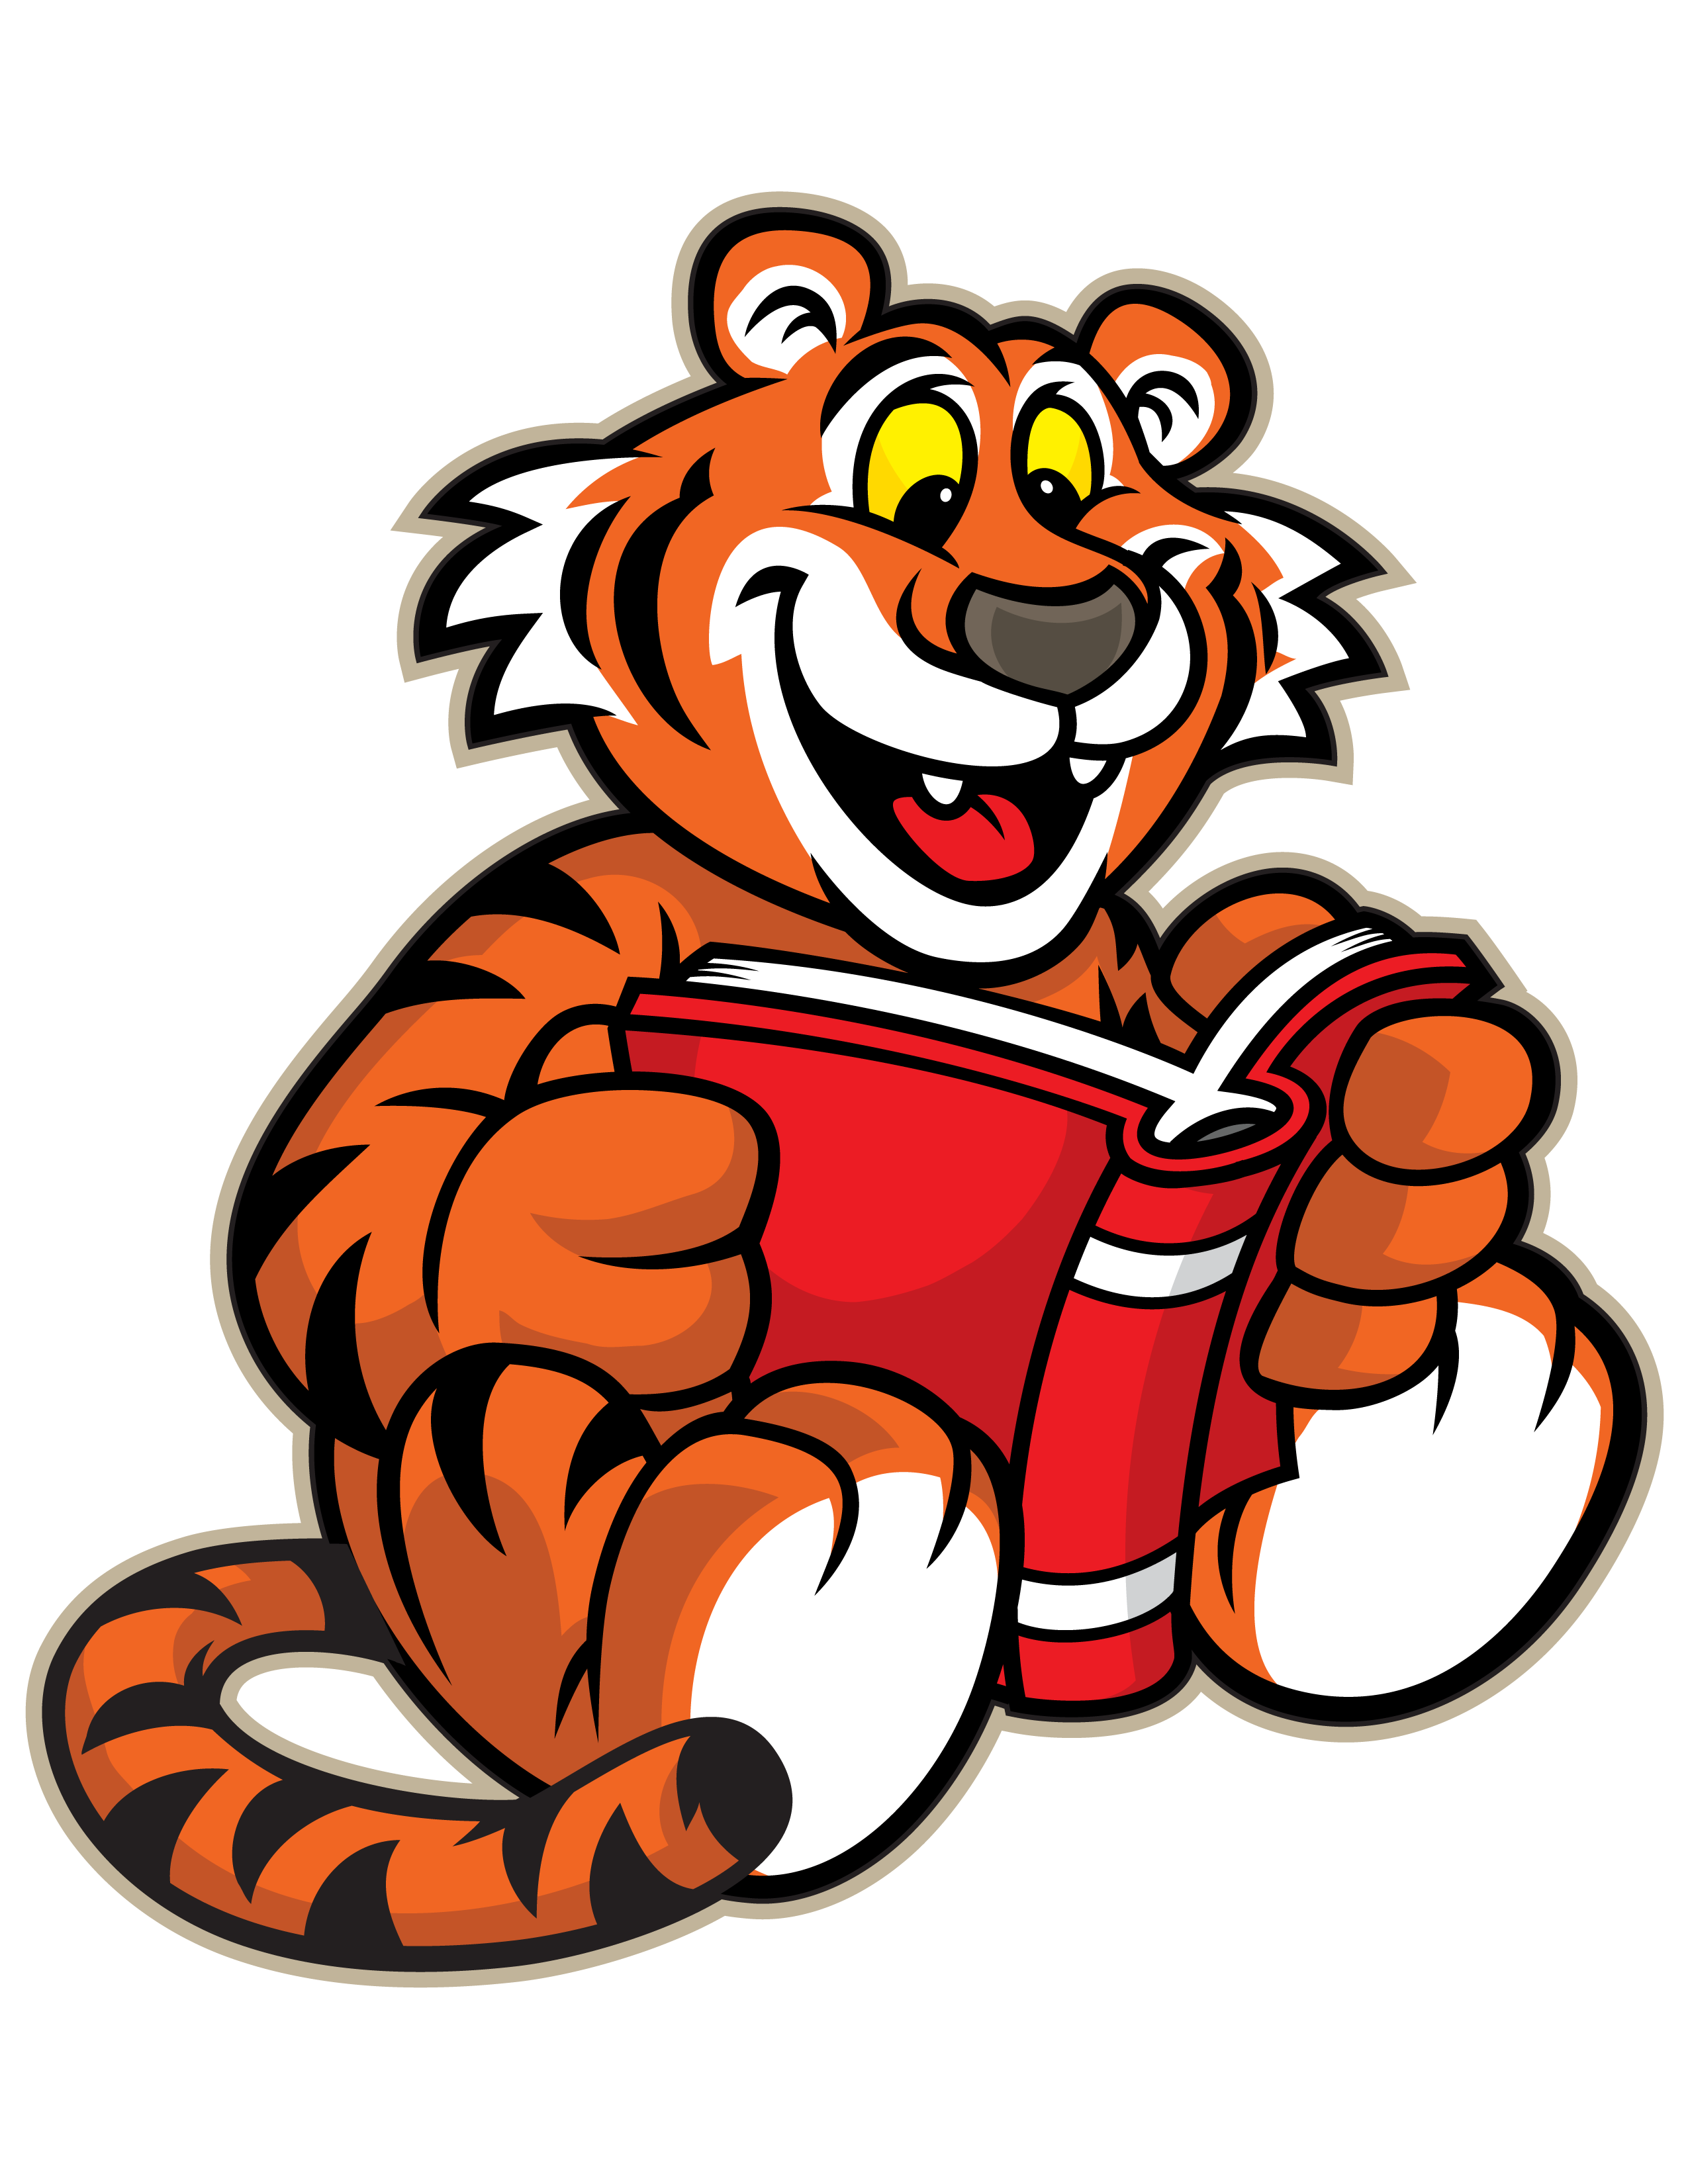 Tiiger reading pencil and. Cougar clipart cartoon